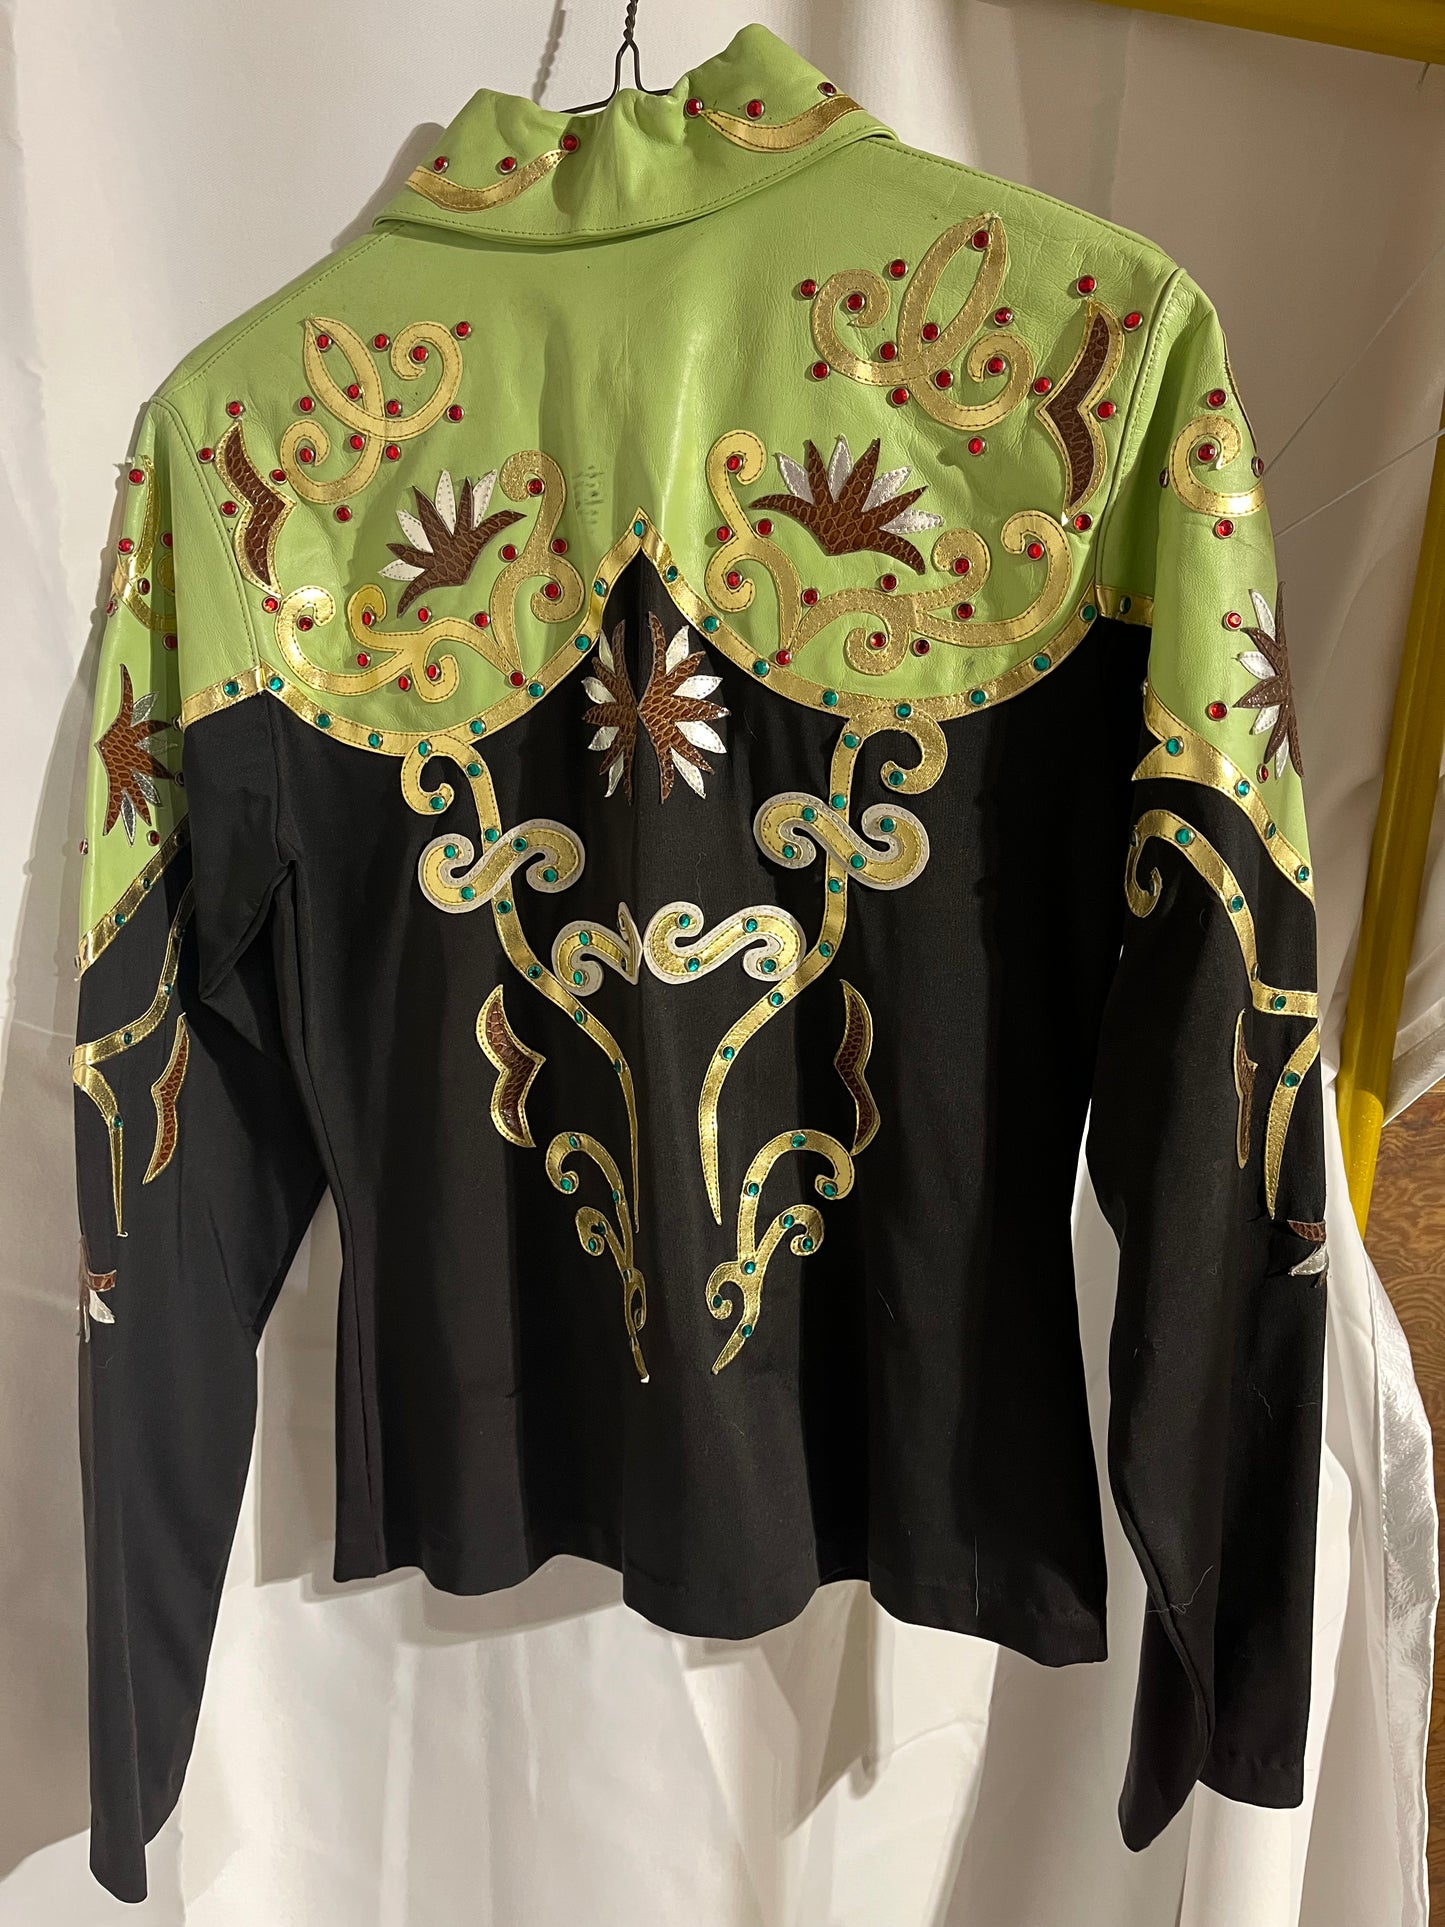 Lime green and black medium show shirt has 2 marks on the back